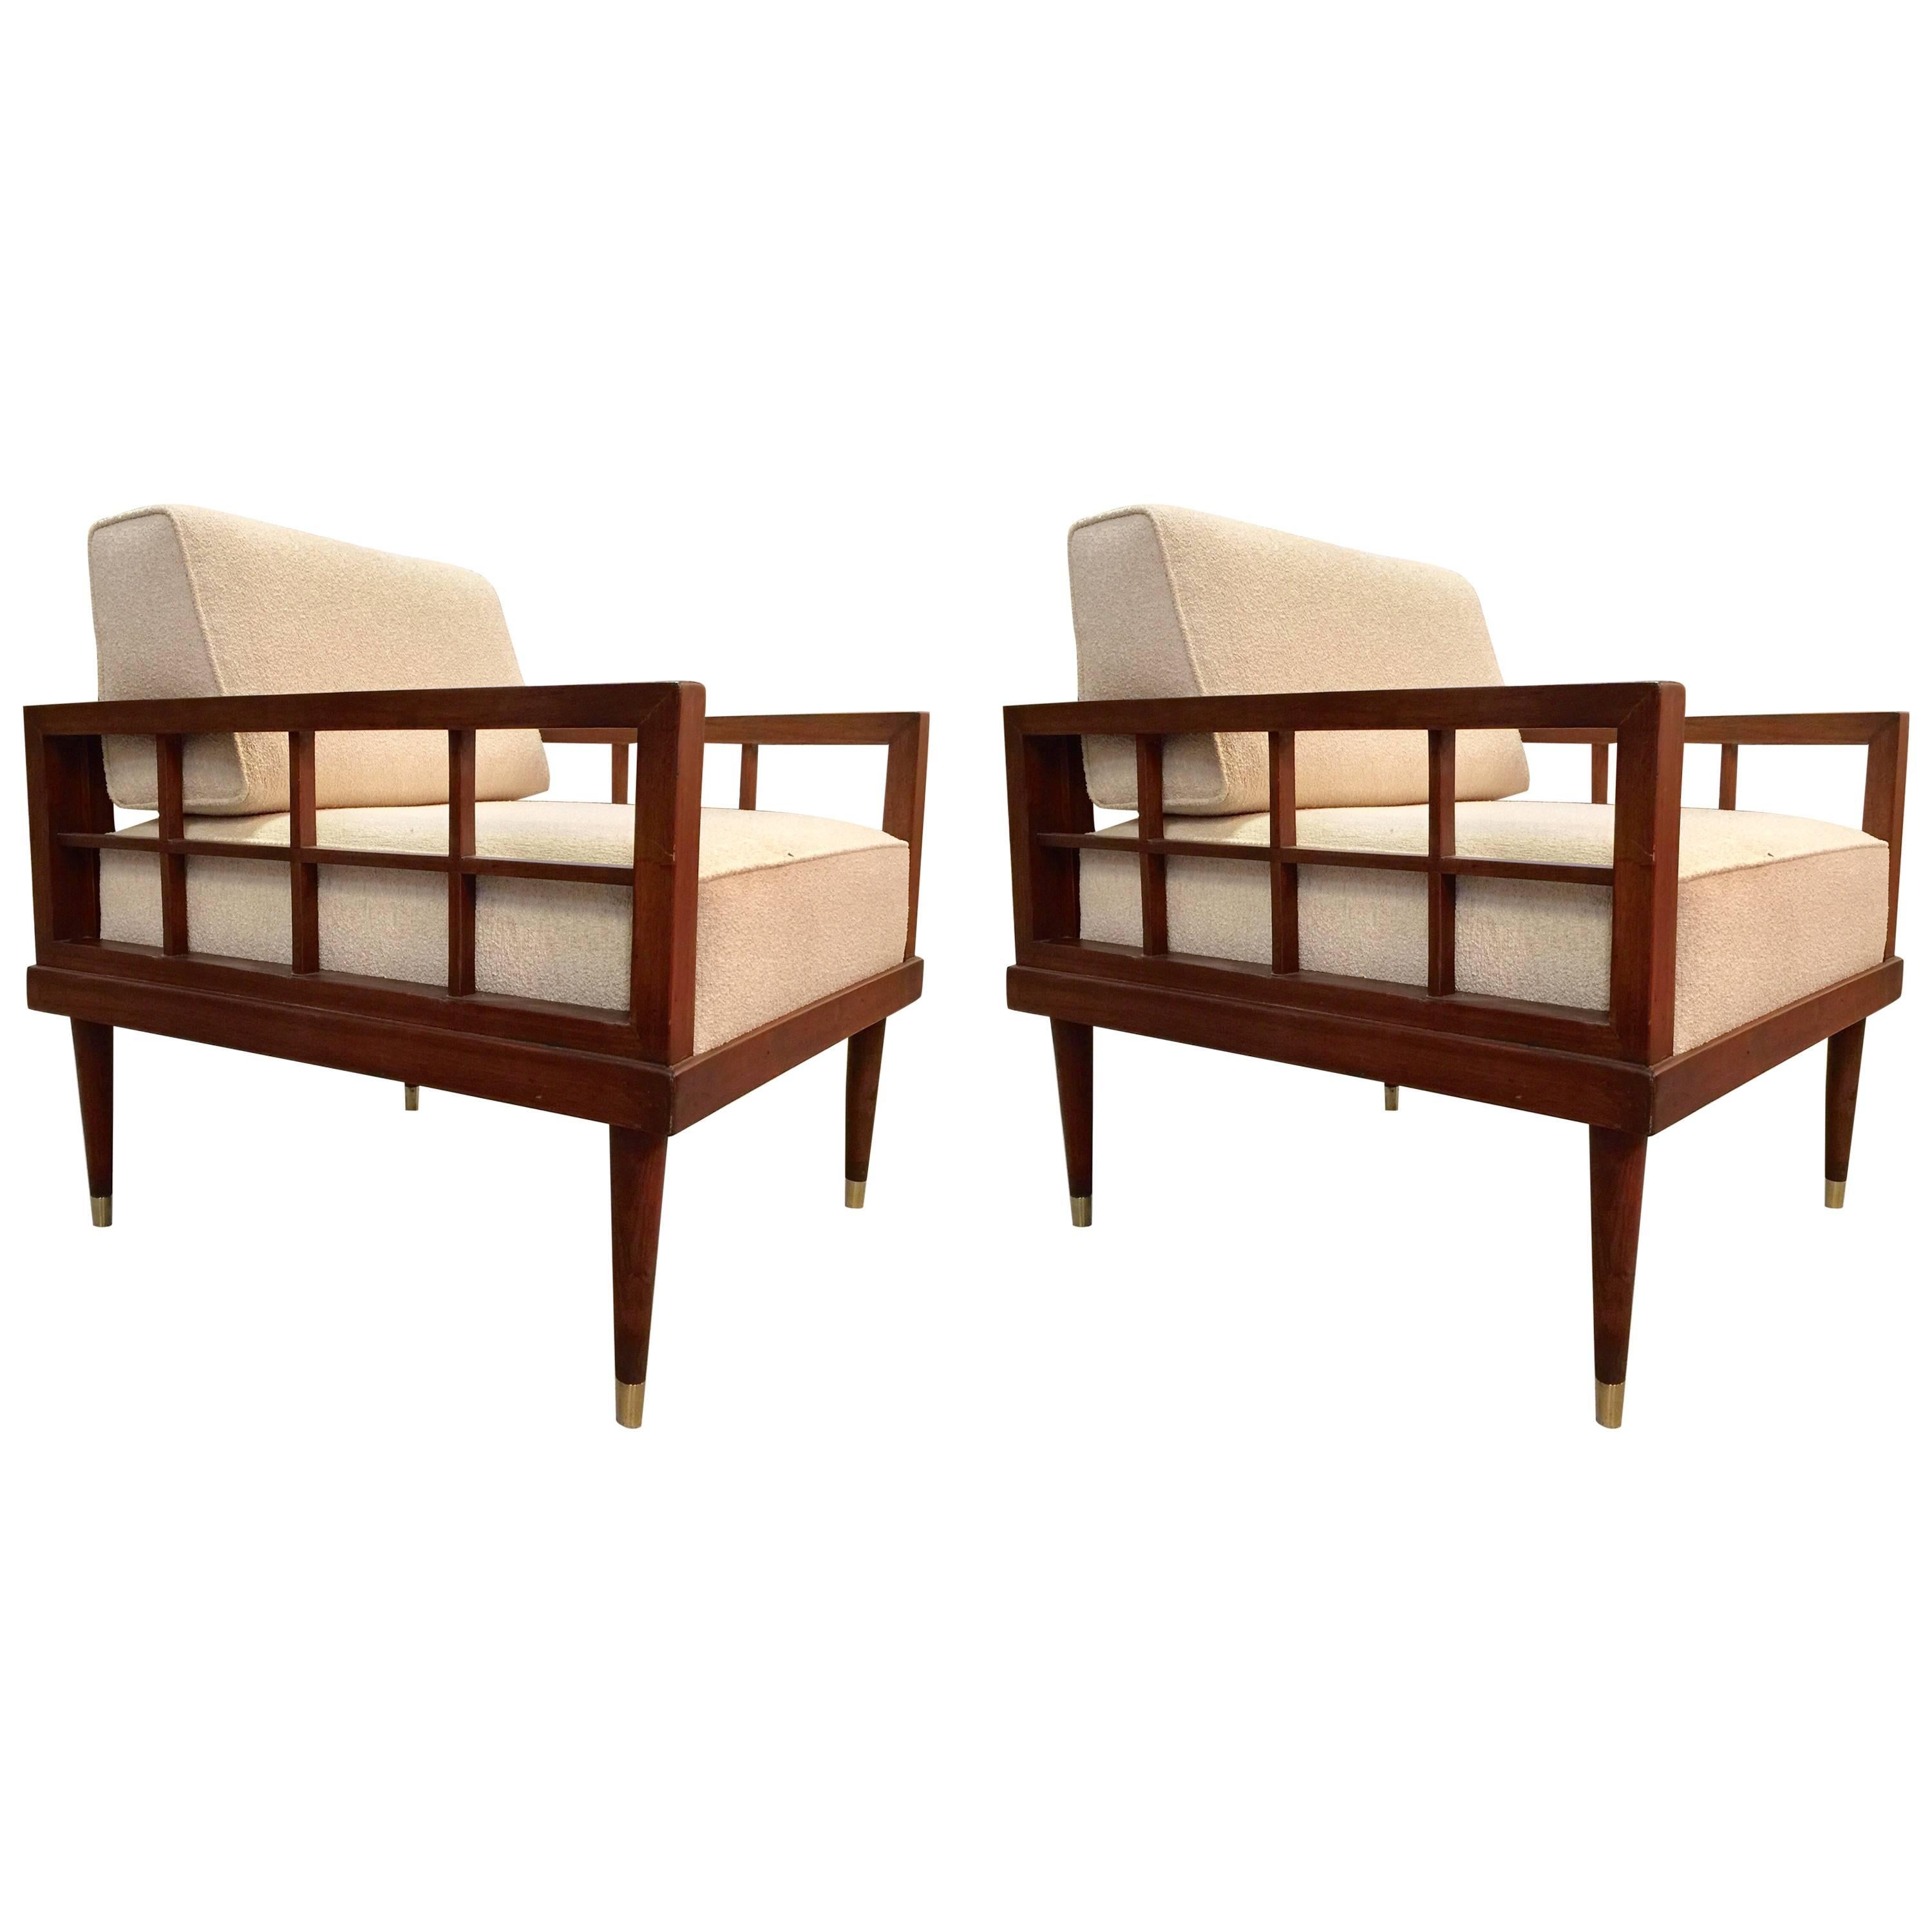 Pair of Frank Lloyd Wright Inspired Chairs